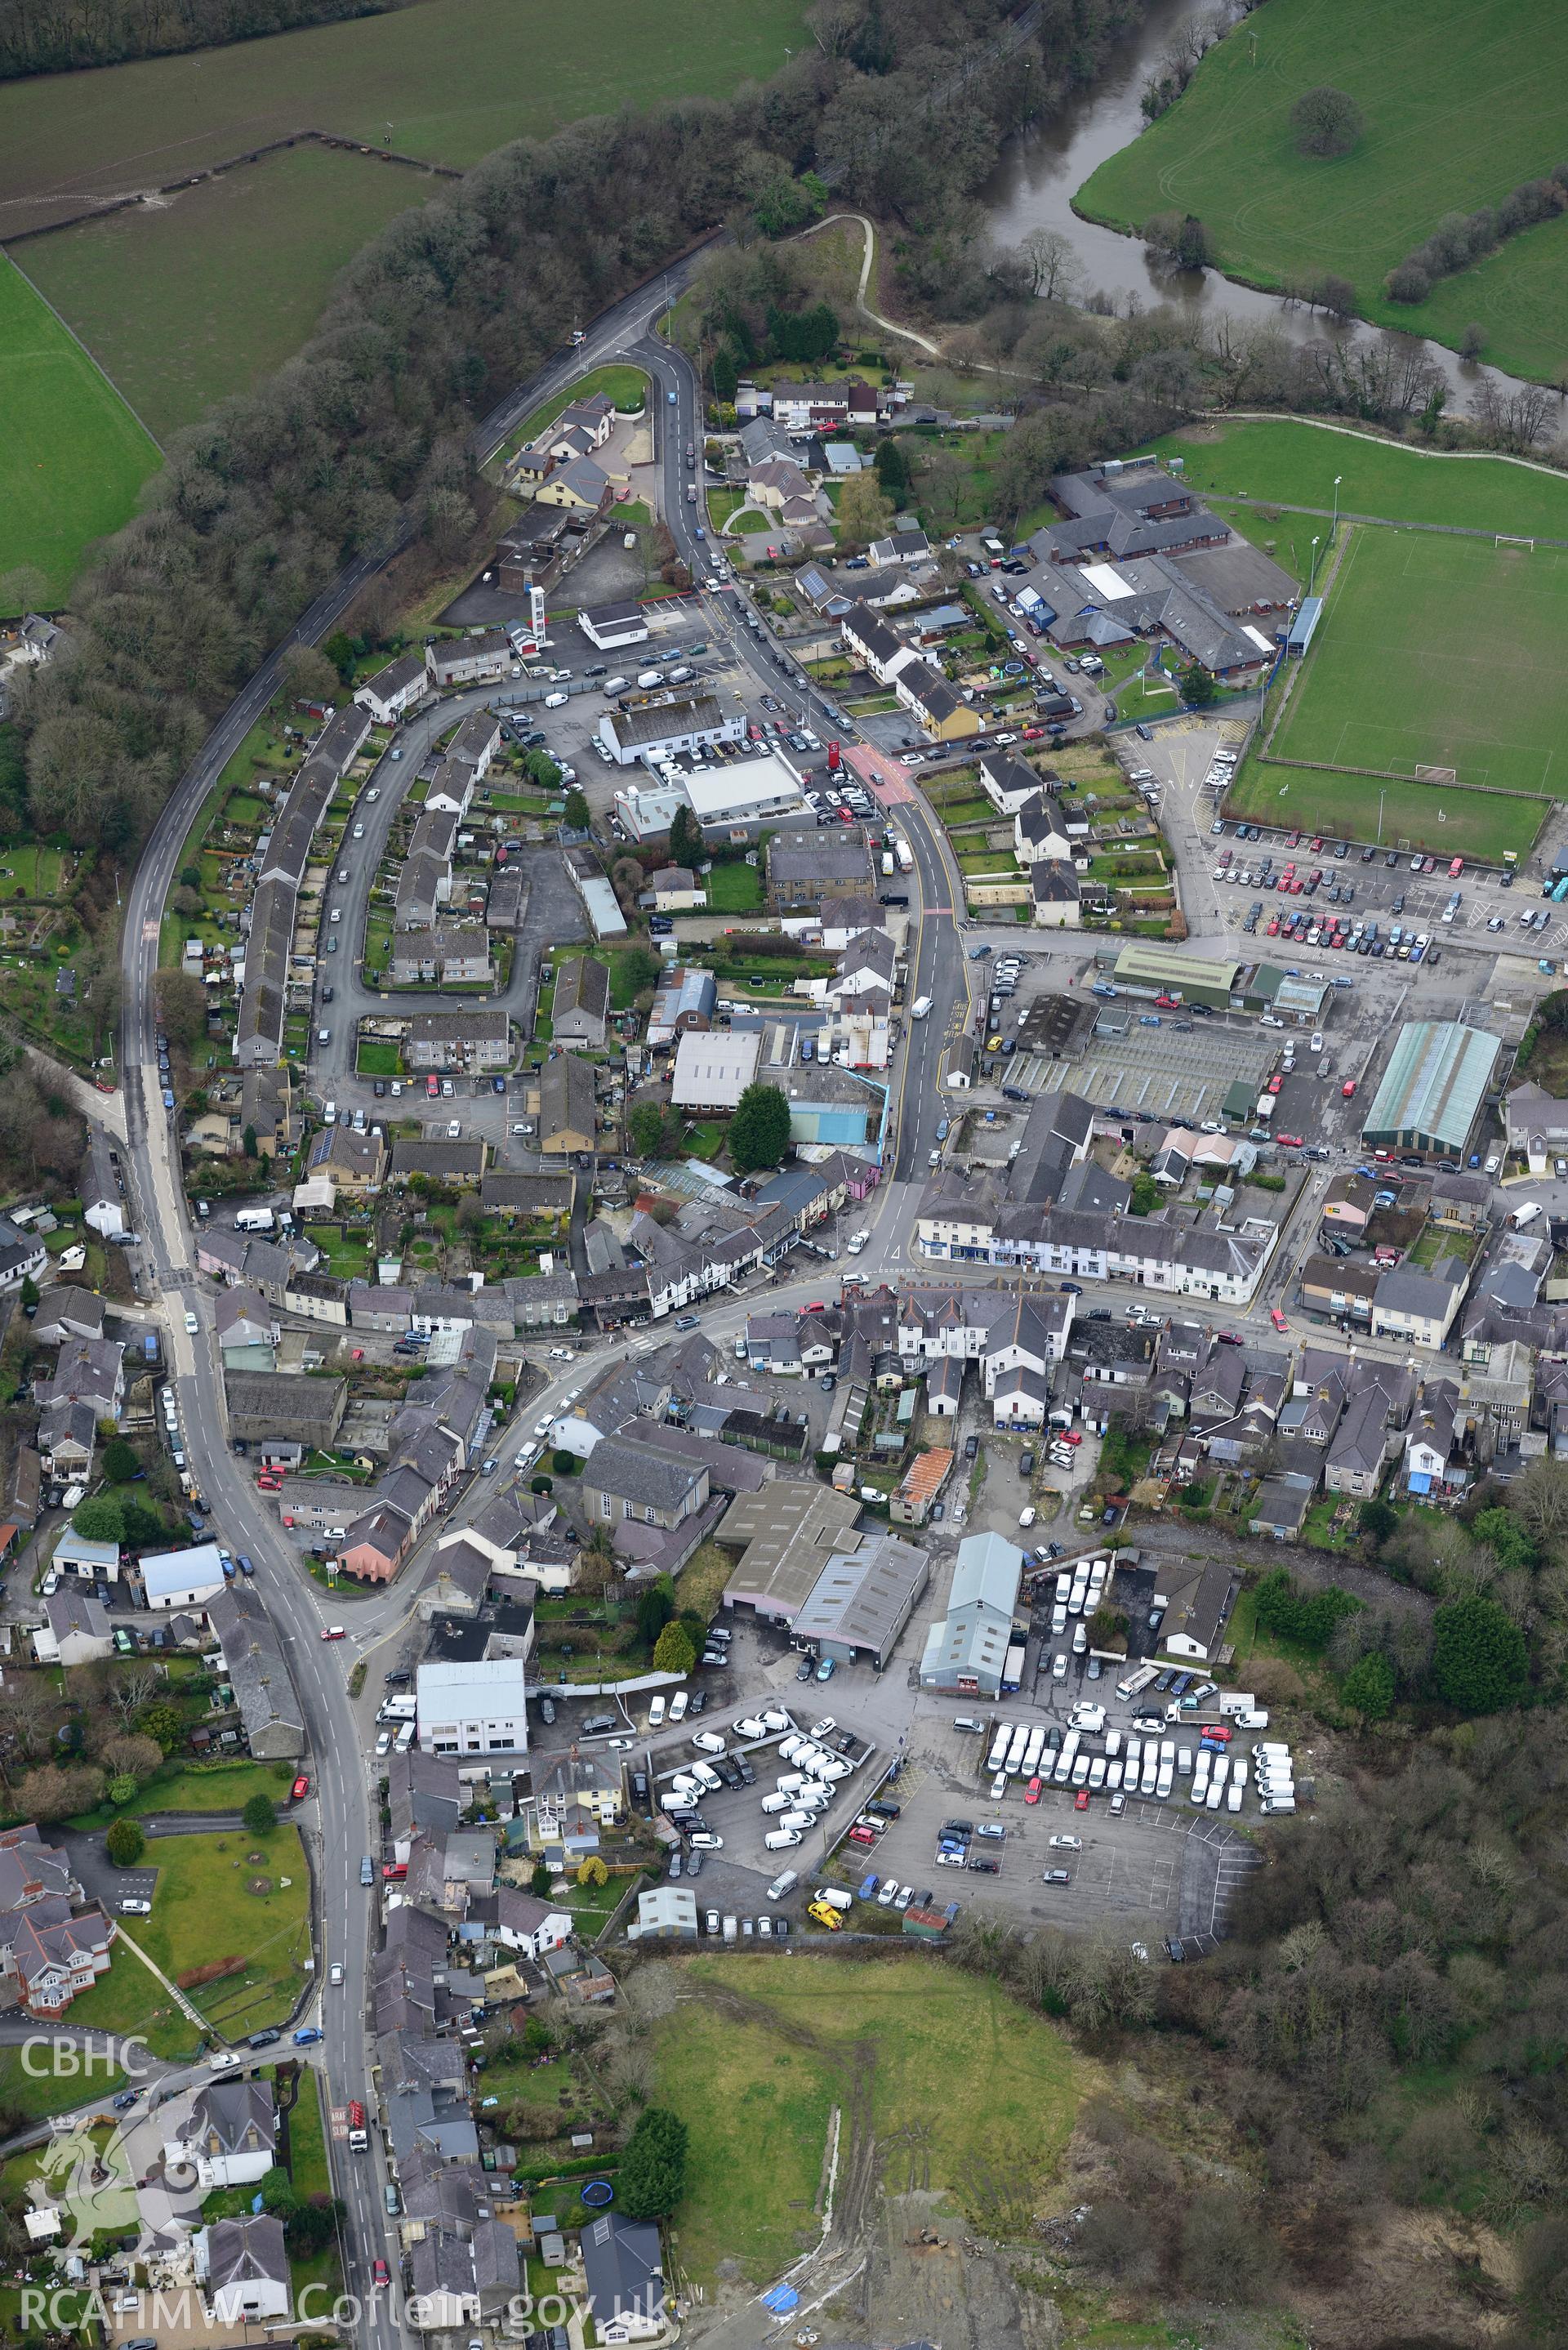 Newcastle Emlyn livestock market, Newcastle Emlyn. Oblique aerial photograph taken during the Royal Commission's programme of archaeological aerial reconnaissance by Toby Driver on 13th March 2015.